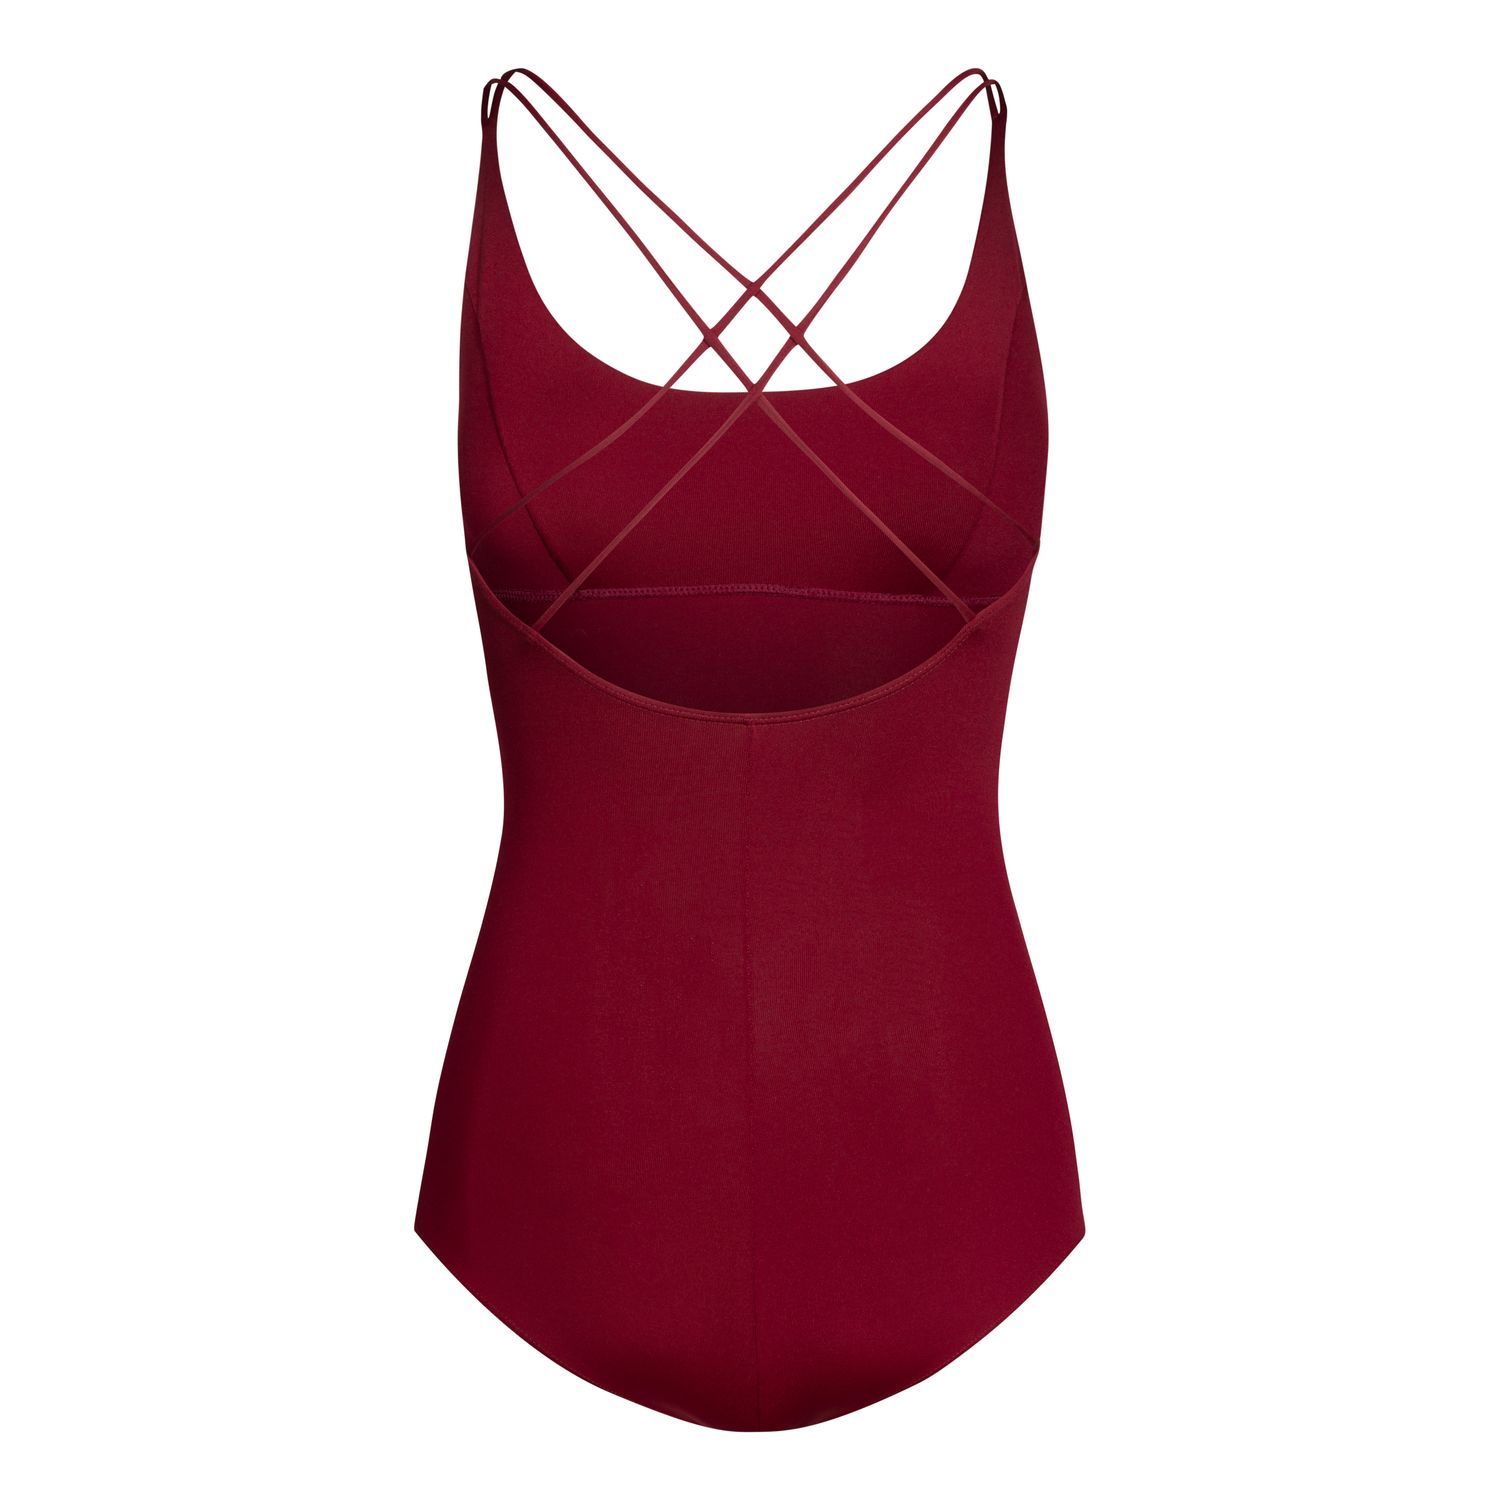 Ladies Jersey with Crossed Straps SL18